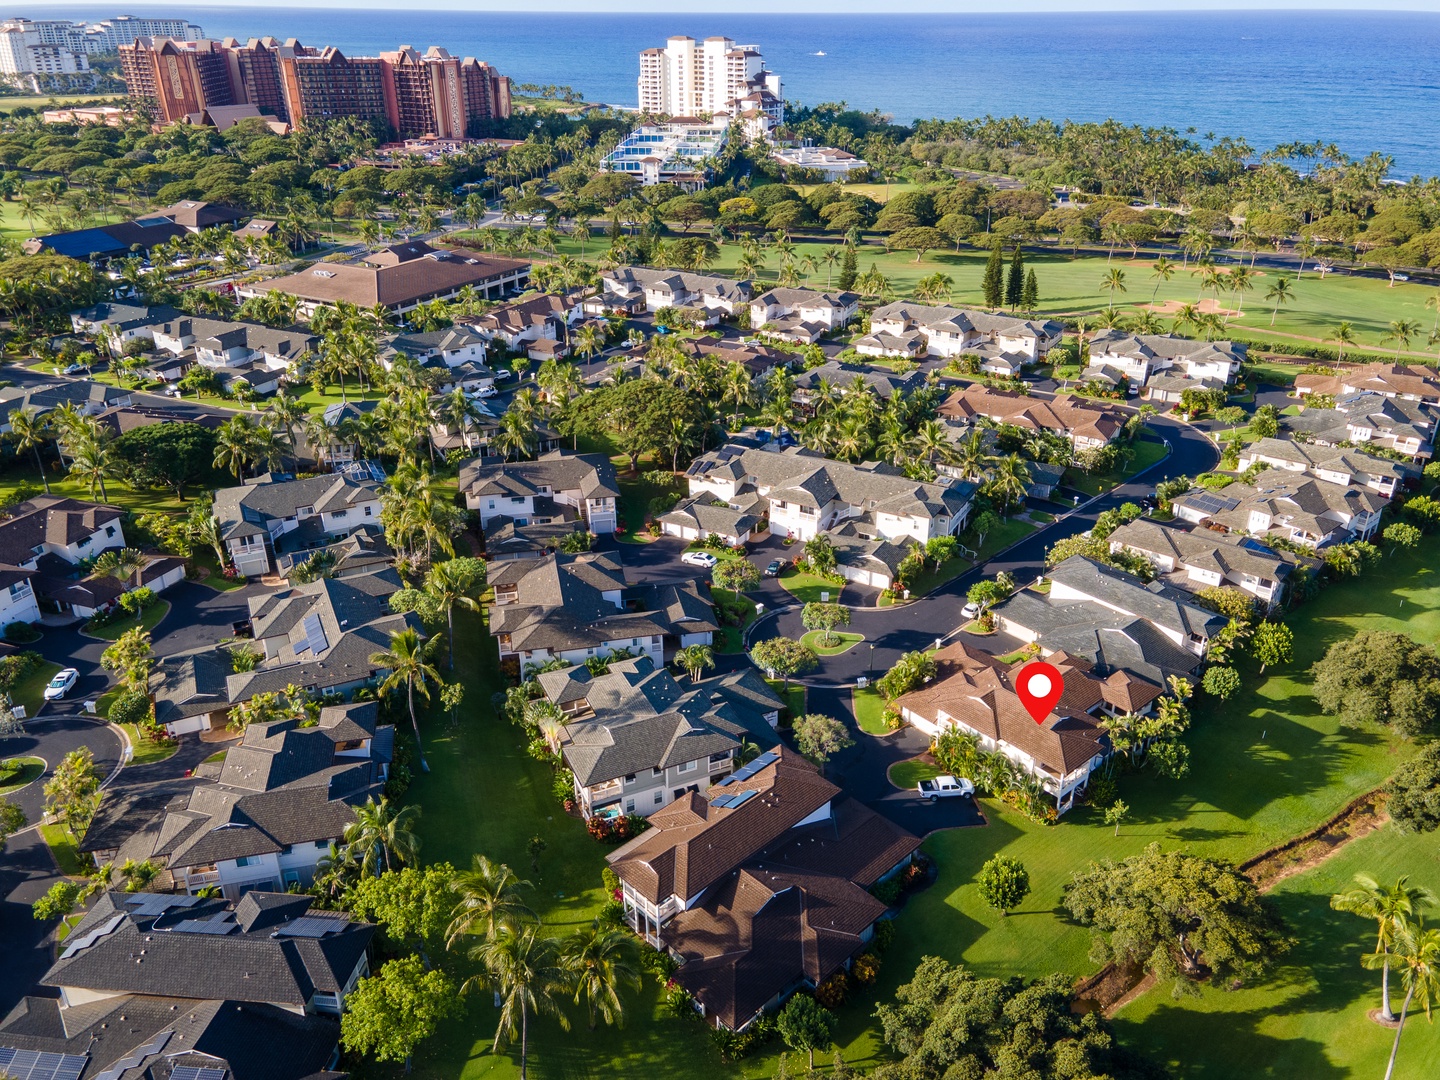 Kapolei Vacation Rentals, Coconut Plantation 1100-2 - An aerial view of the neighborhood.